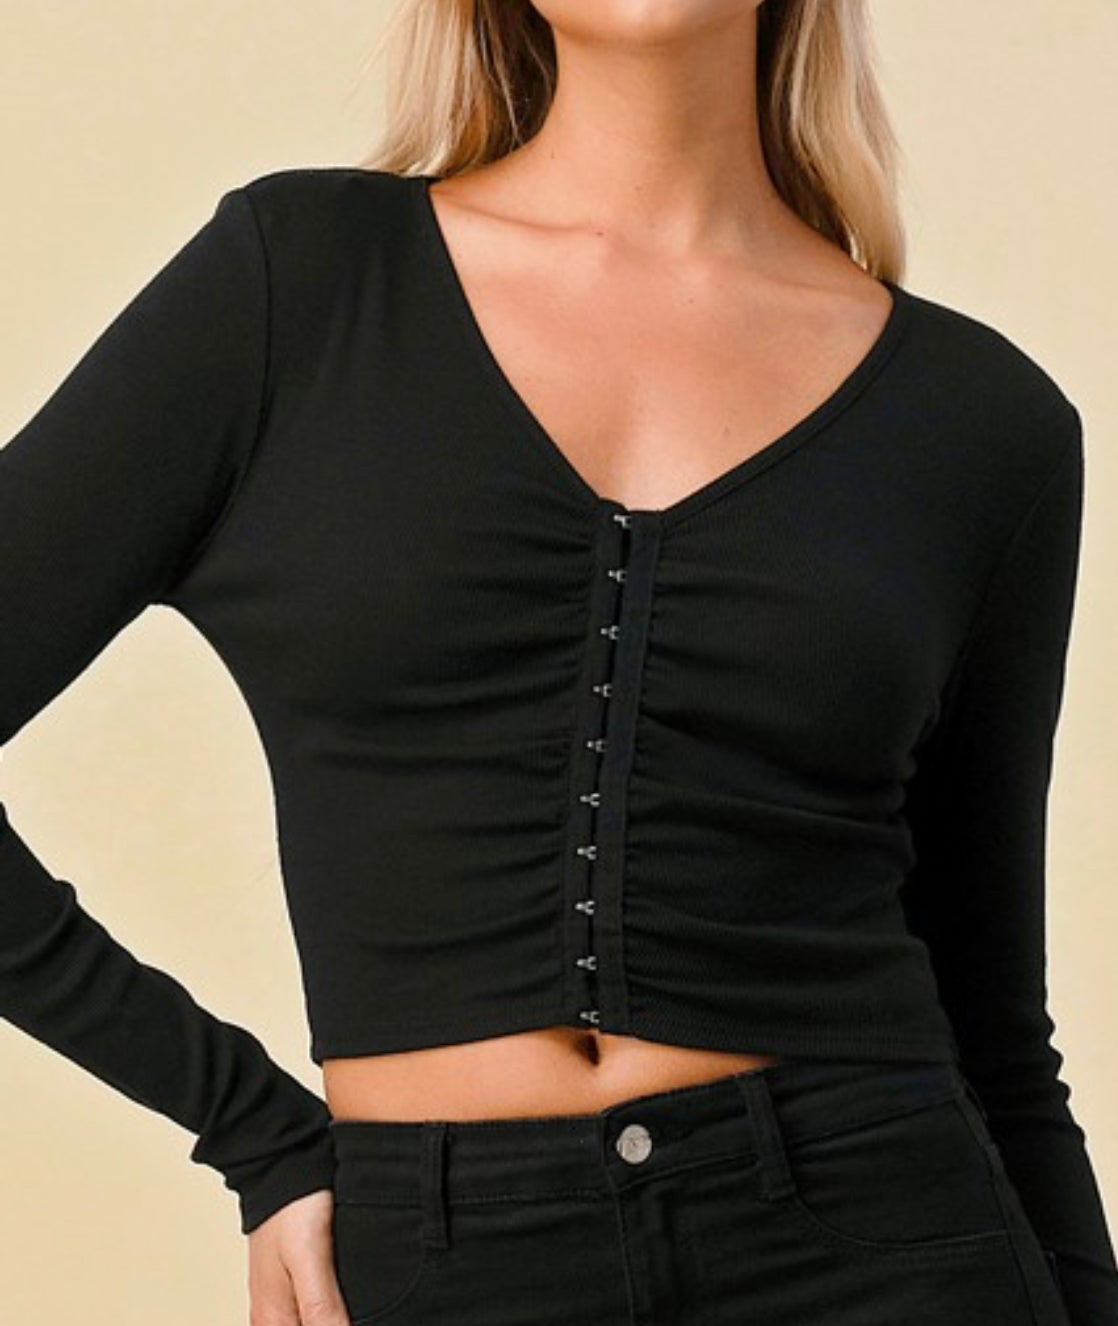 Black hook and eye crop top, great with skirts or jeans!